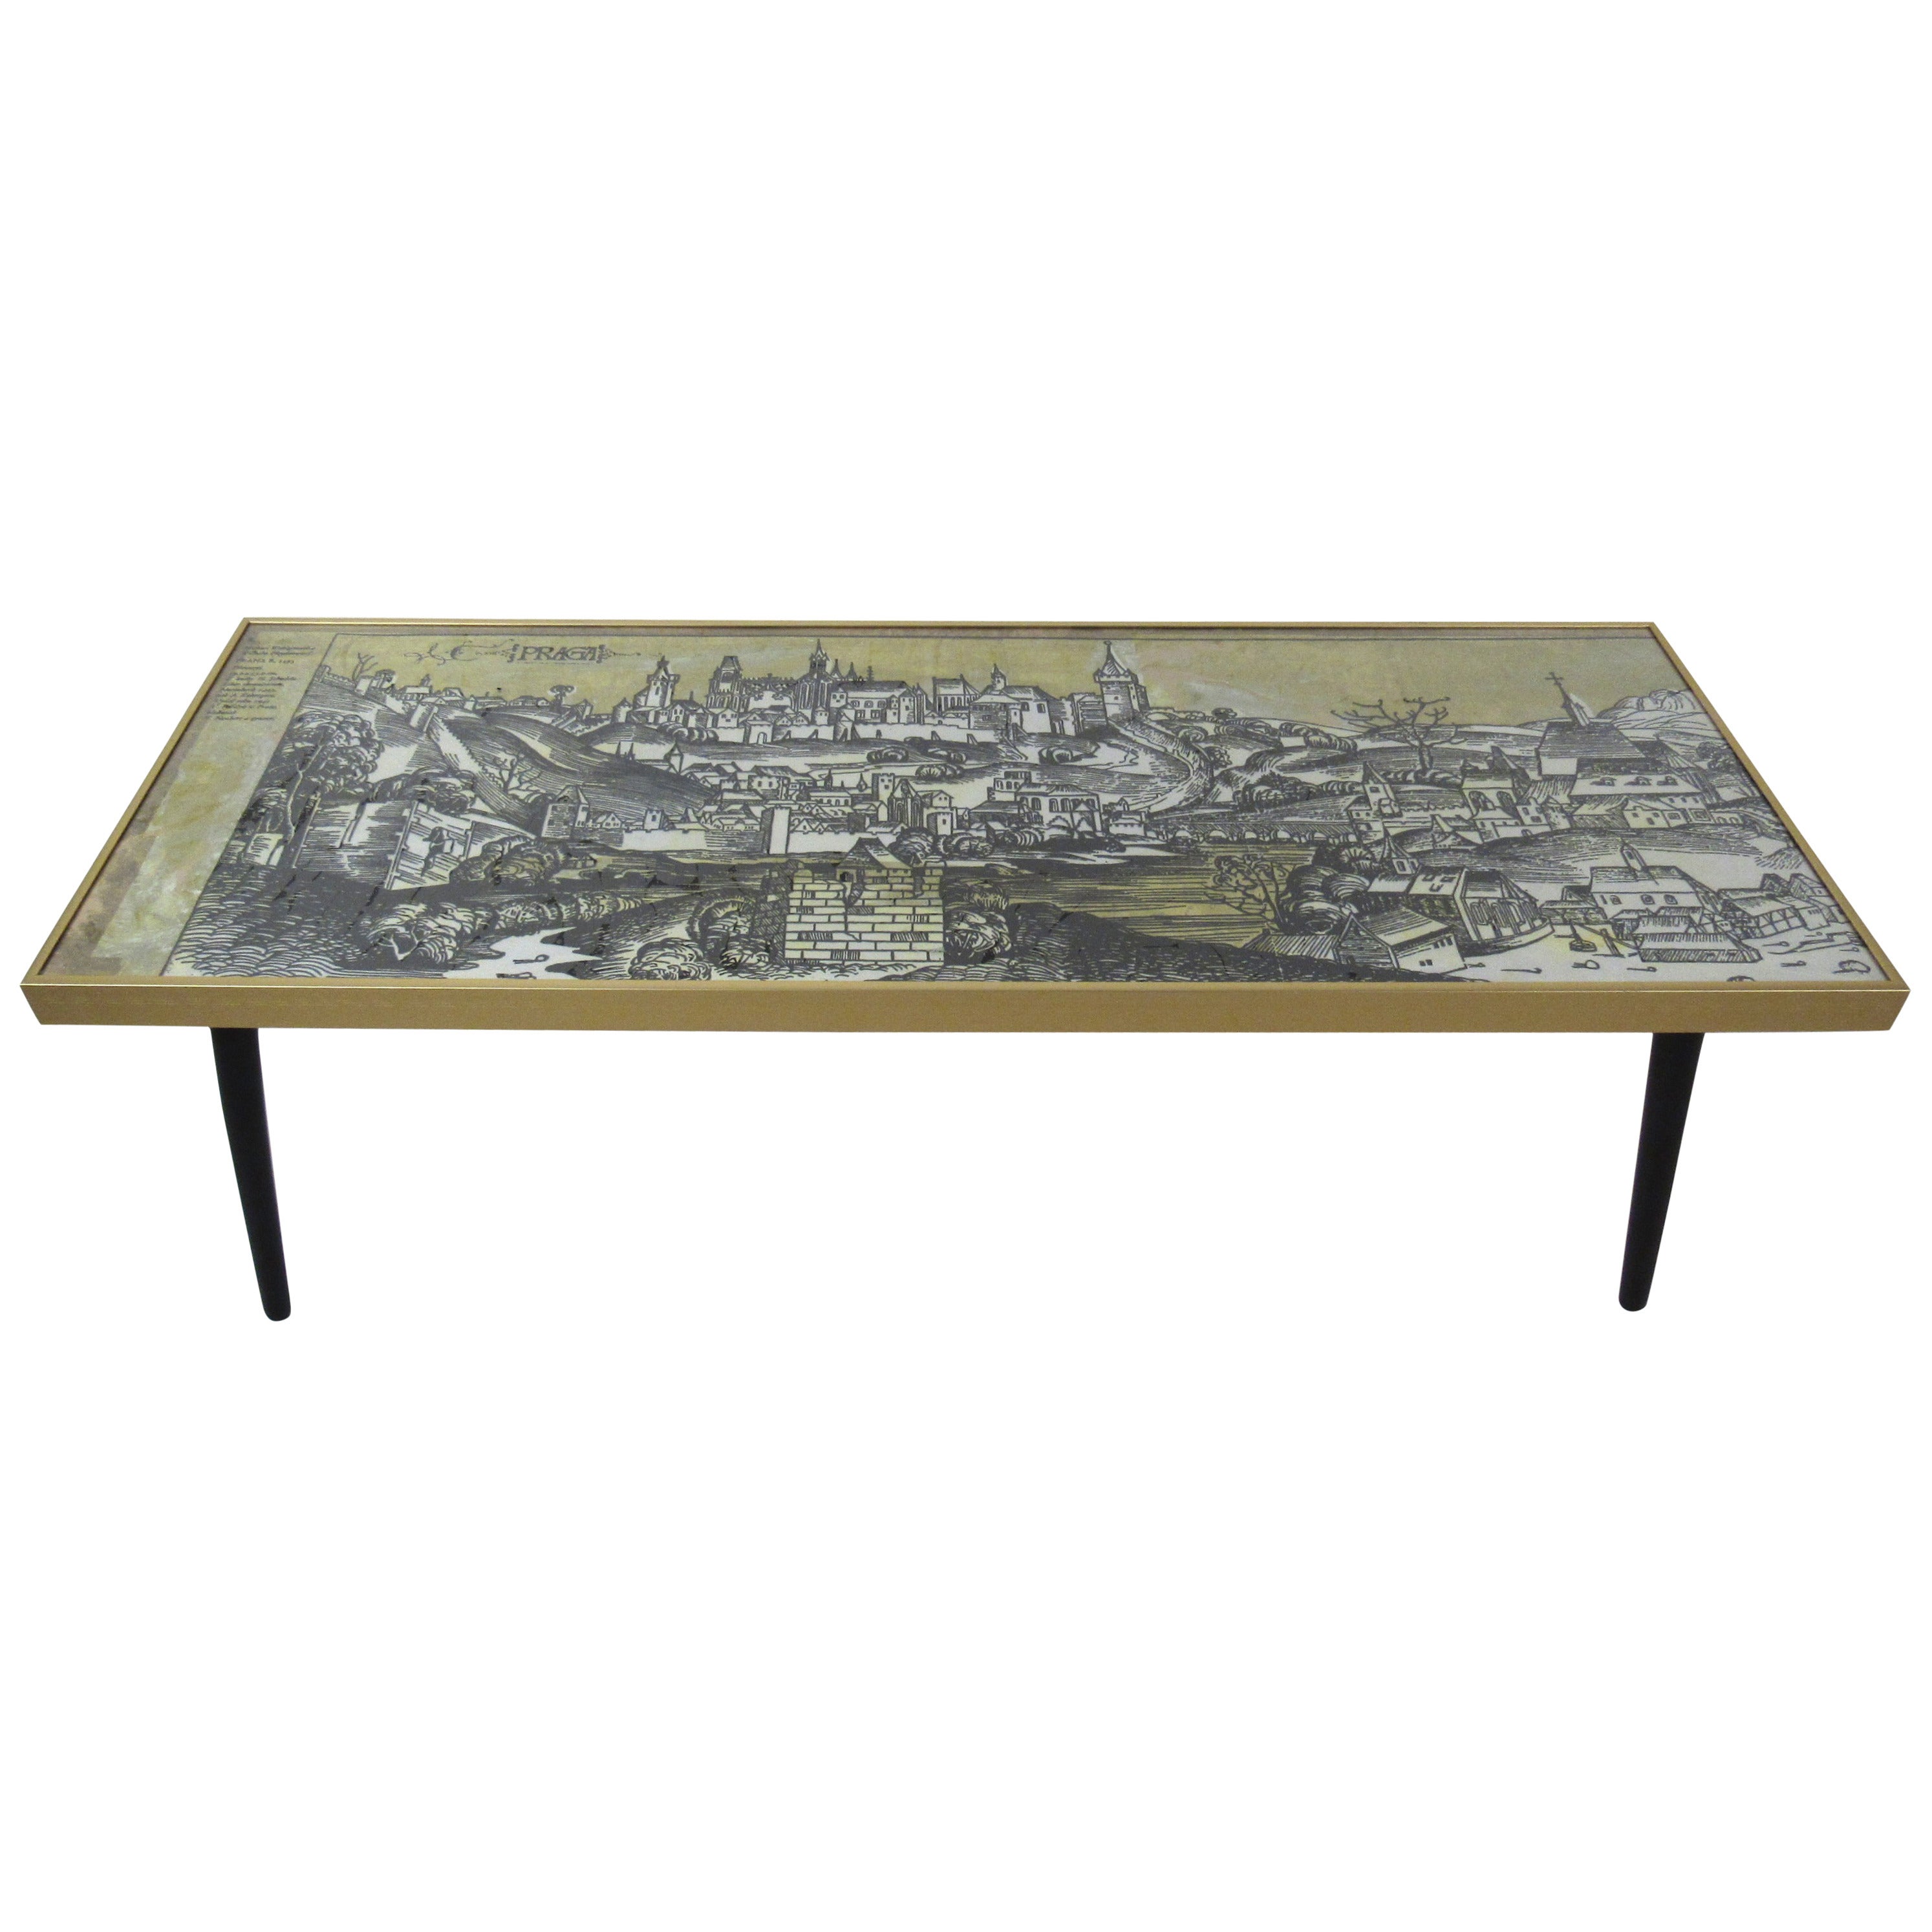 Table with Detailed Rendering of Praga For Sale